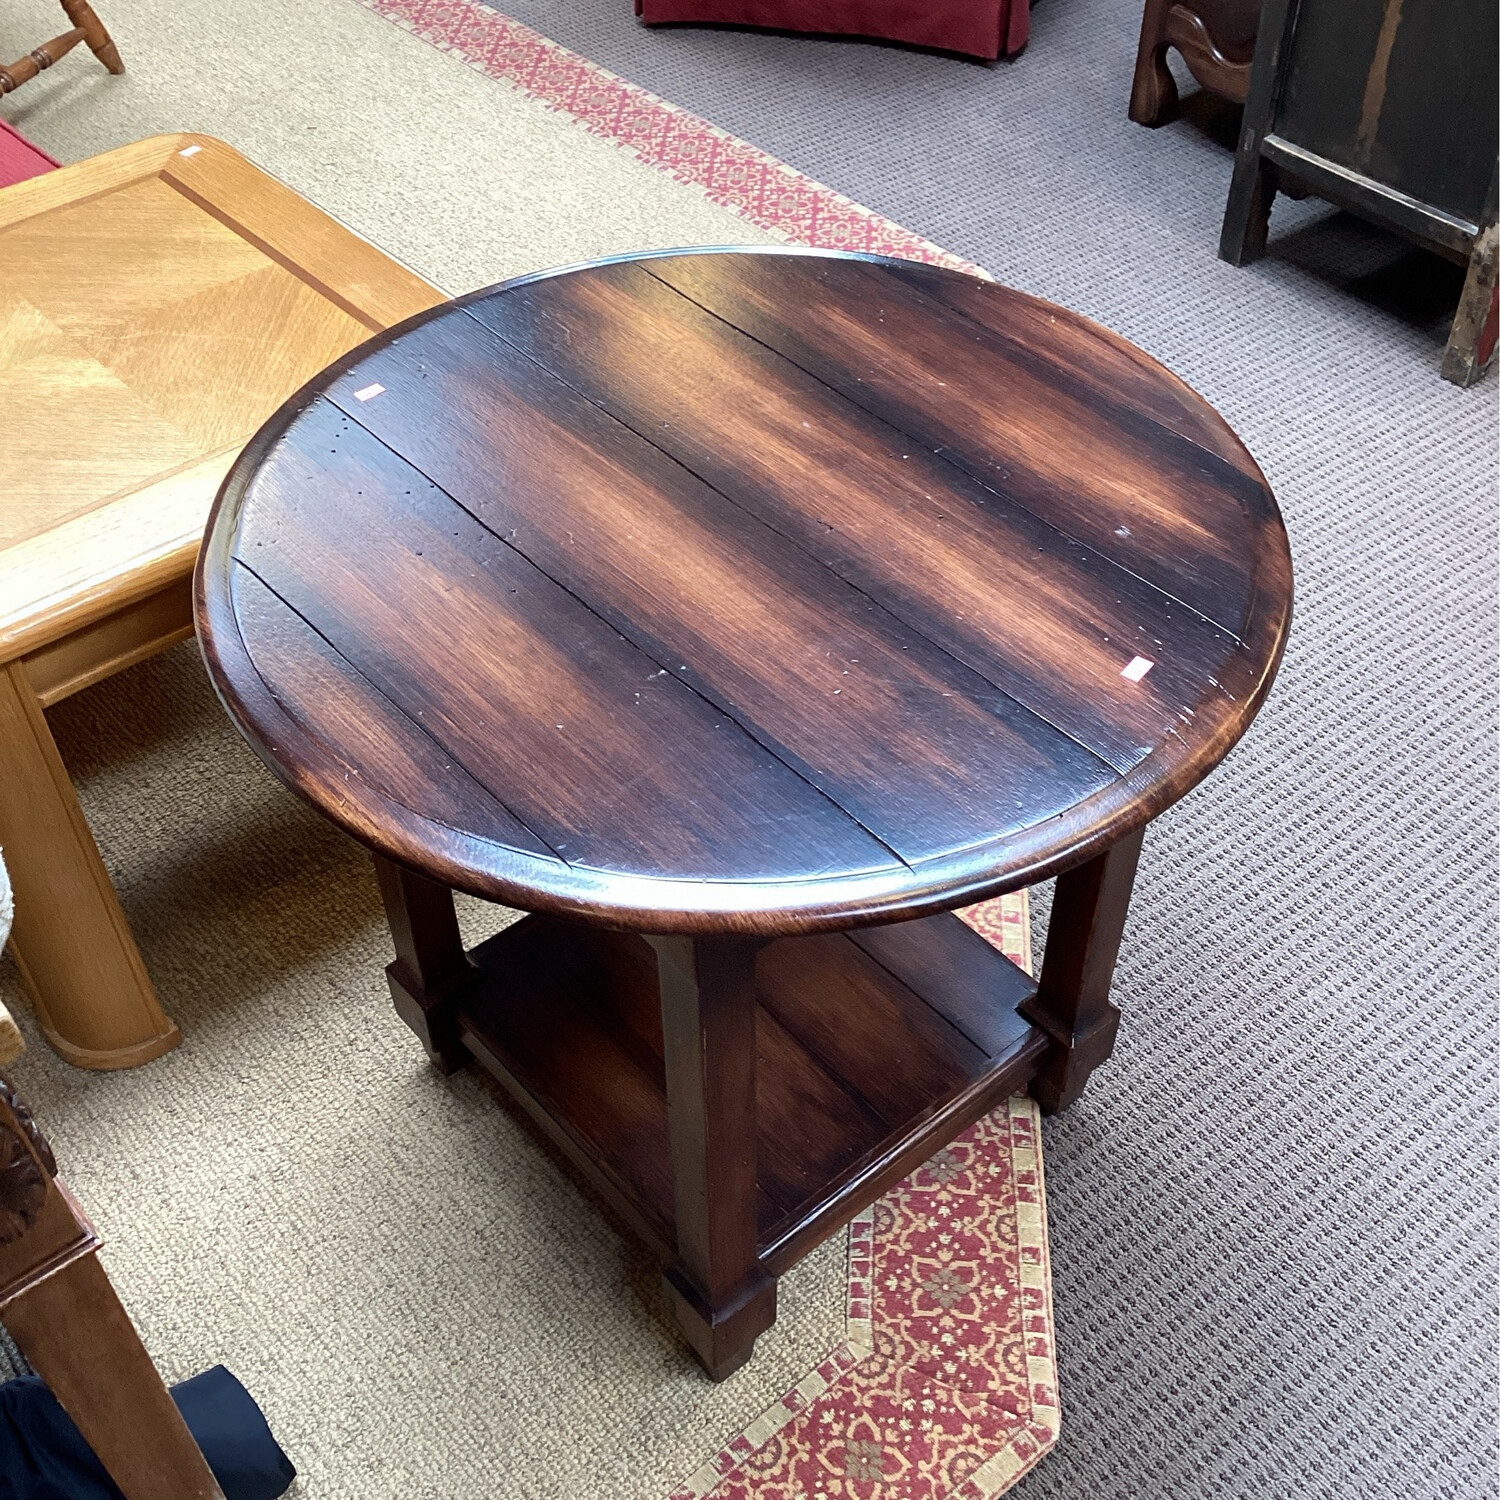 28” Round Coffee Wooden Coffee Table